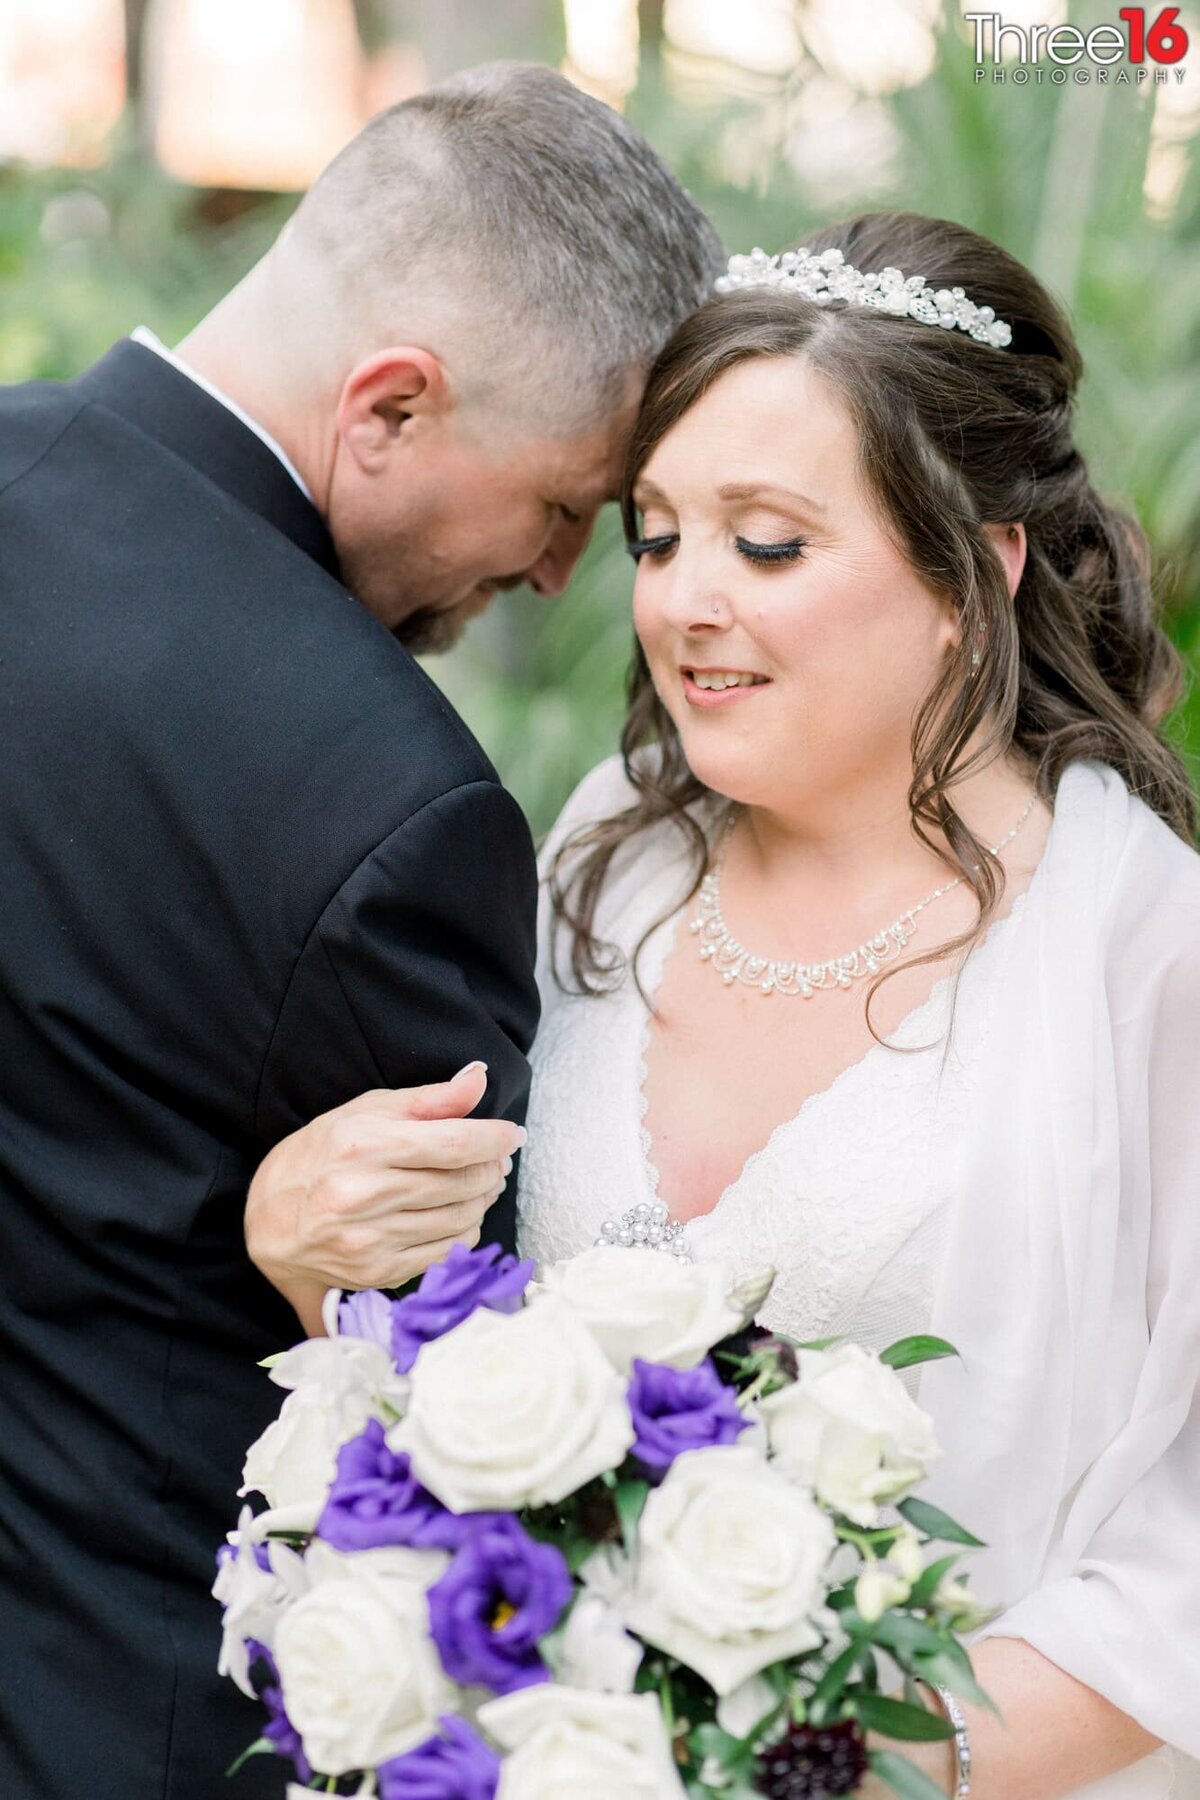 Tender moment as Groom's head touches Bride's head